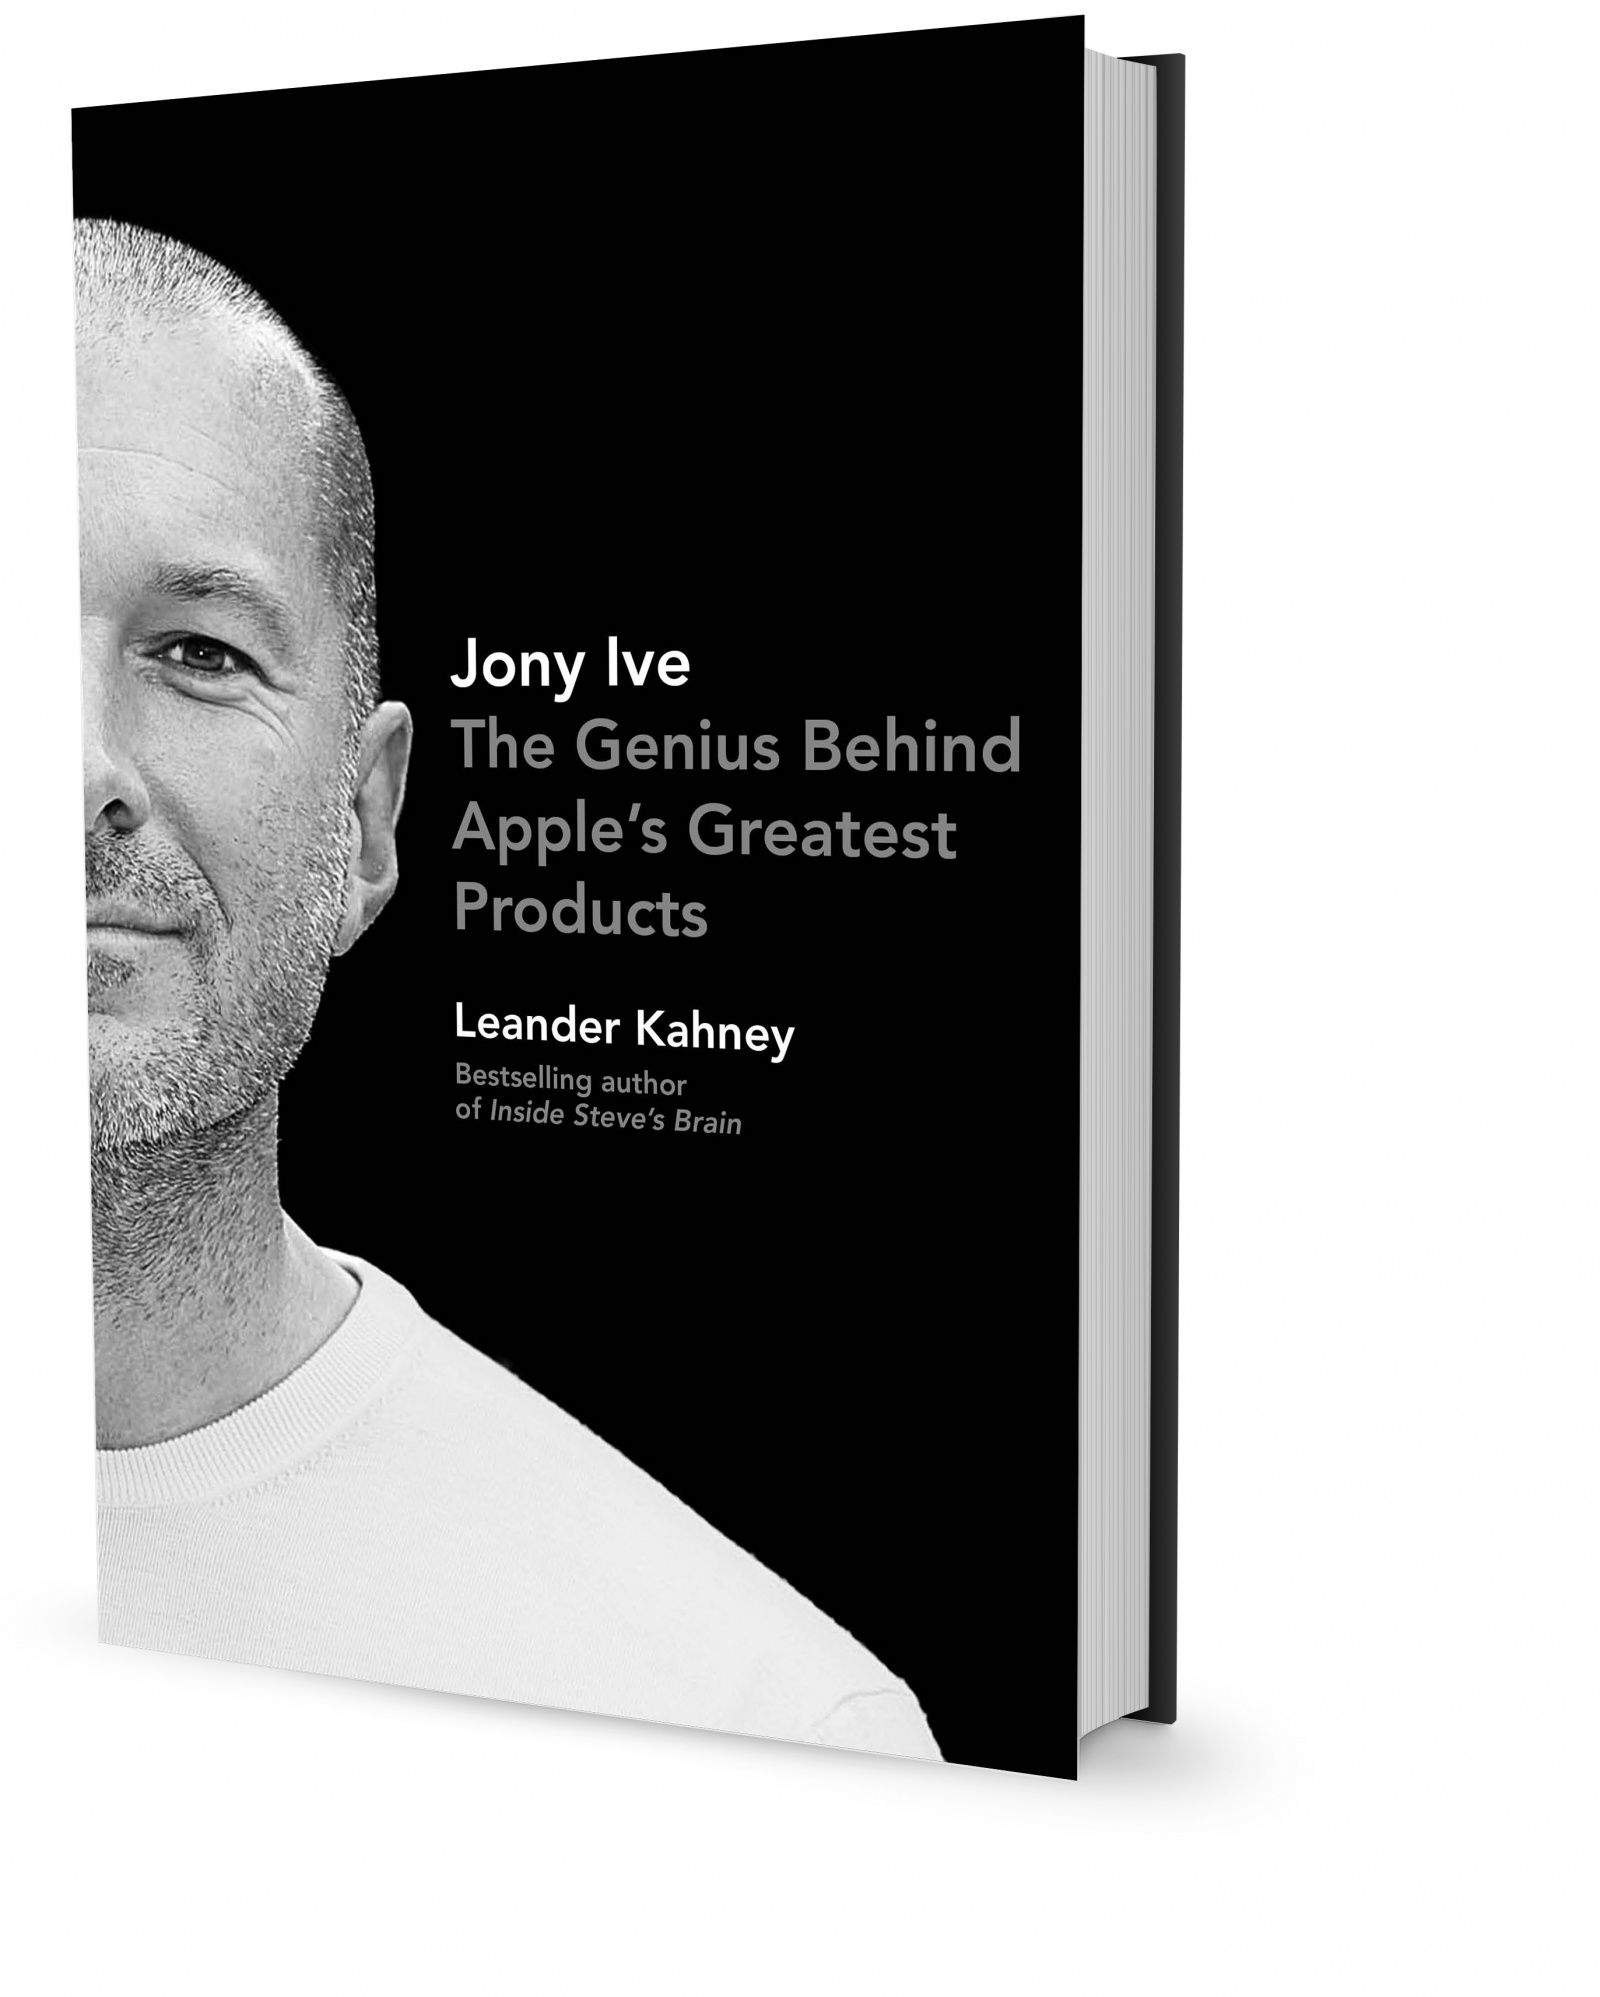 Jony Ive's story is certainly central to Apple.